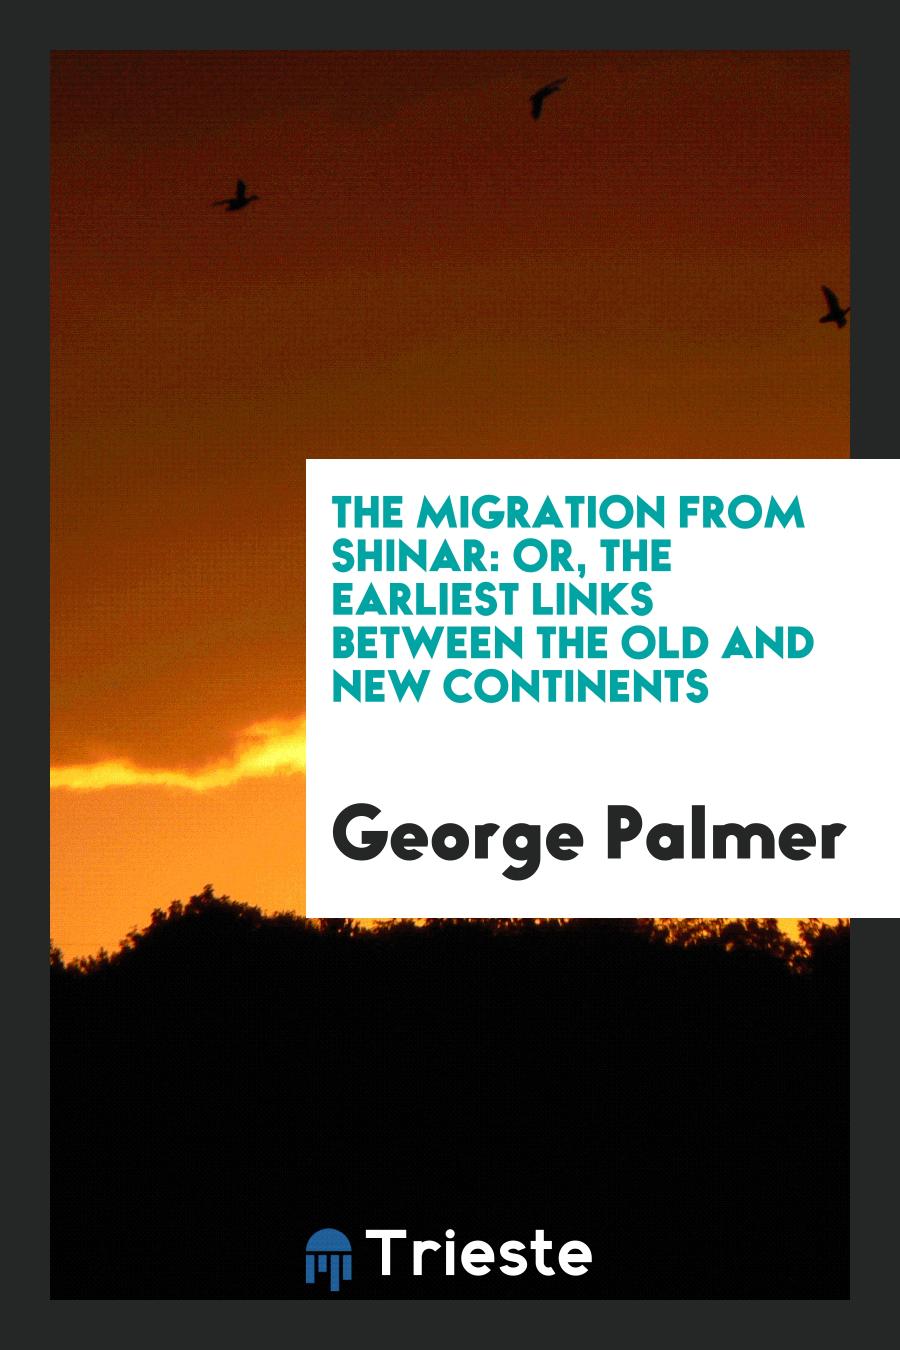 The Migration from Shinar: Or, The Earliest Links between the Old and New Continents